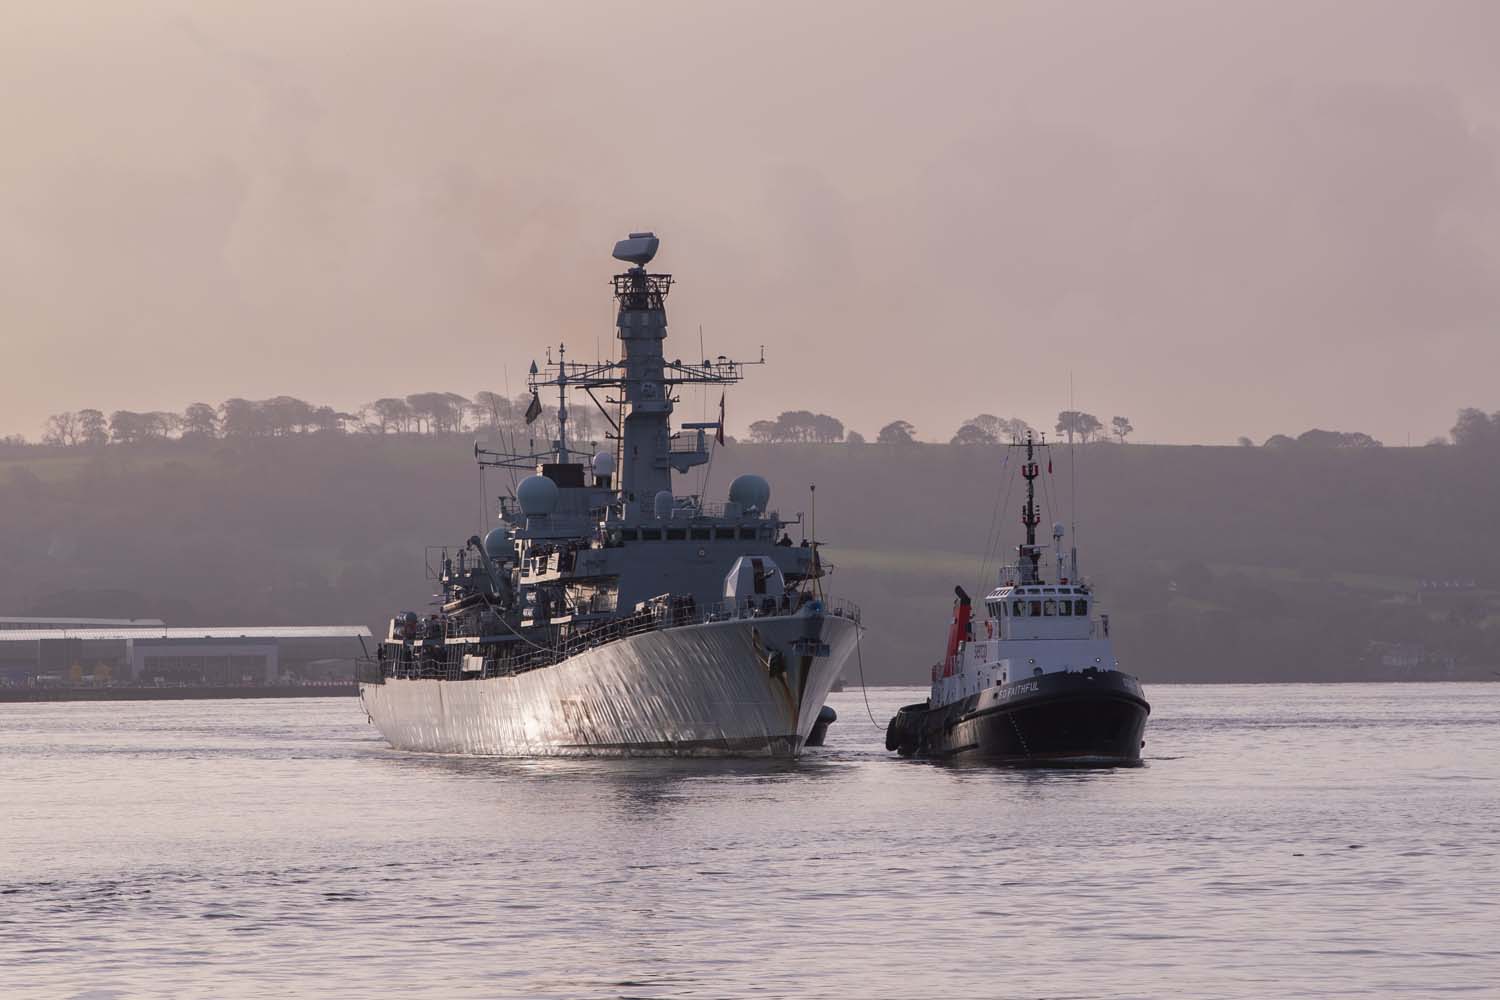 Warship HMS Portland back home after autumn of operations